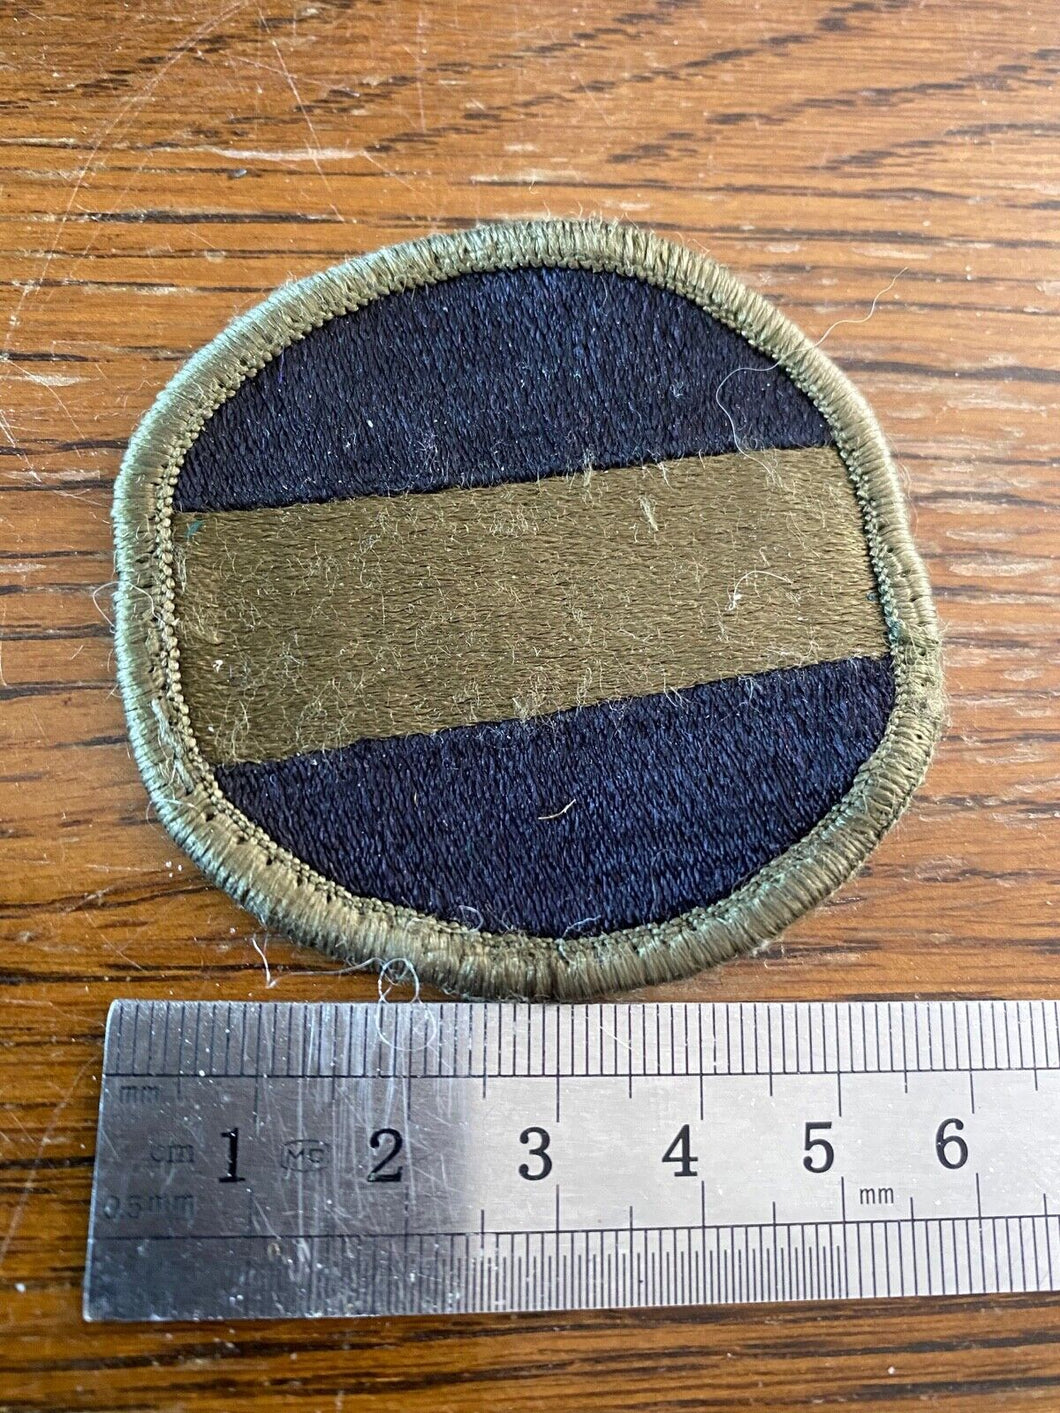 WW2 / post war US Army Division cloth patch / shoulder badge.